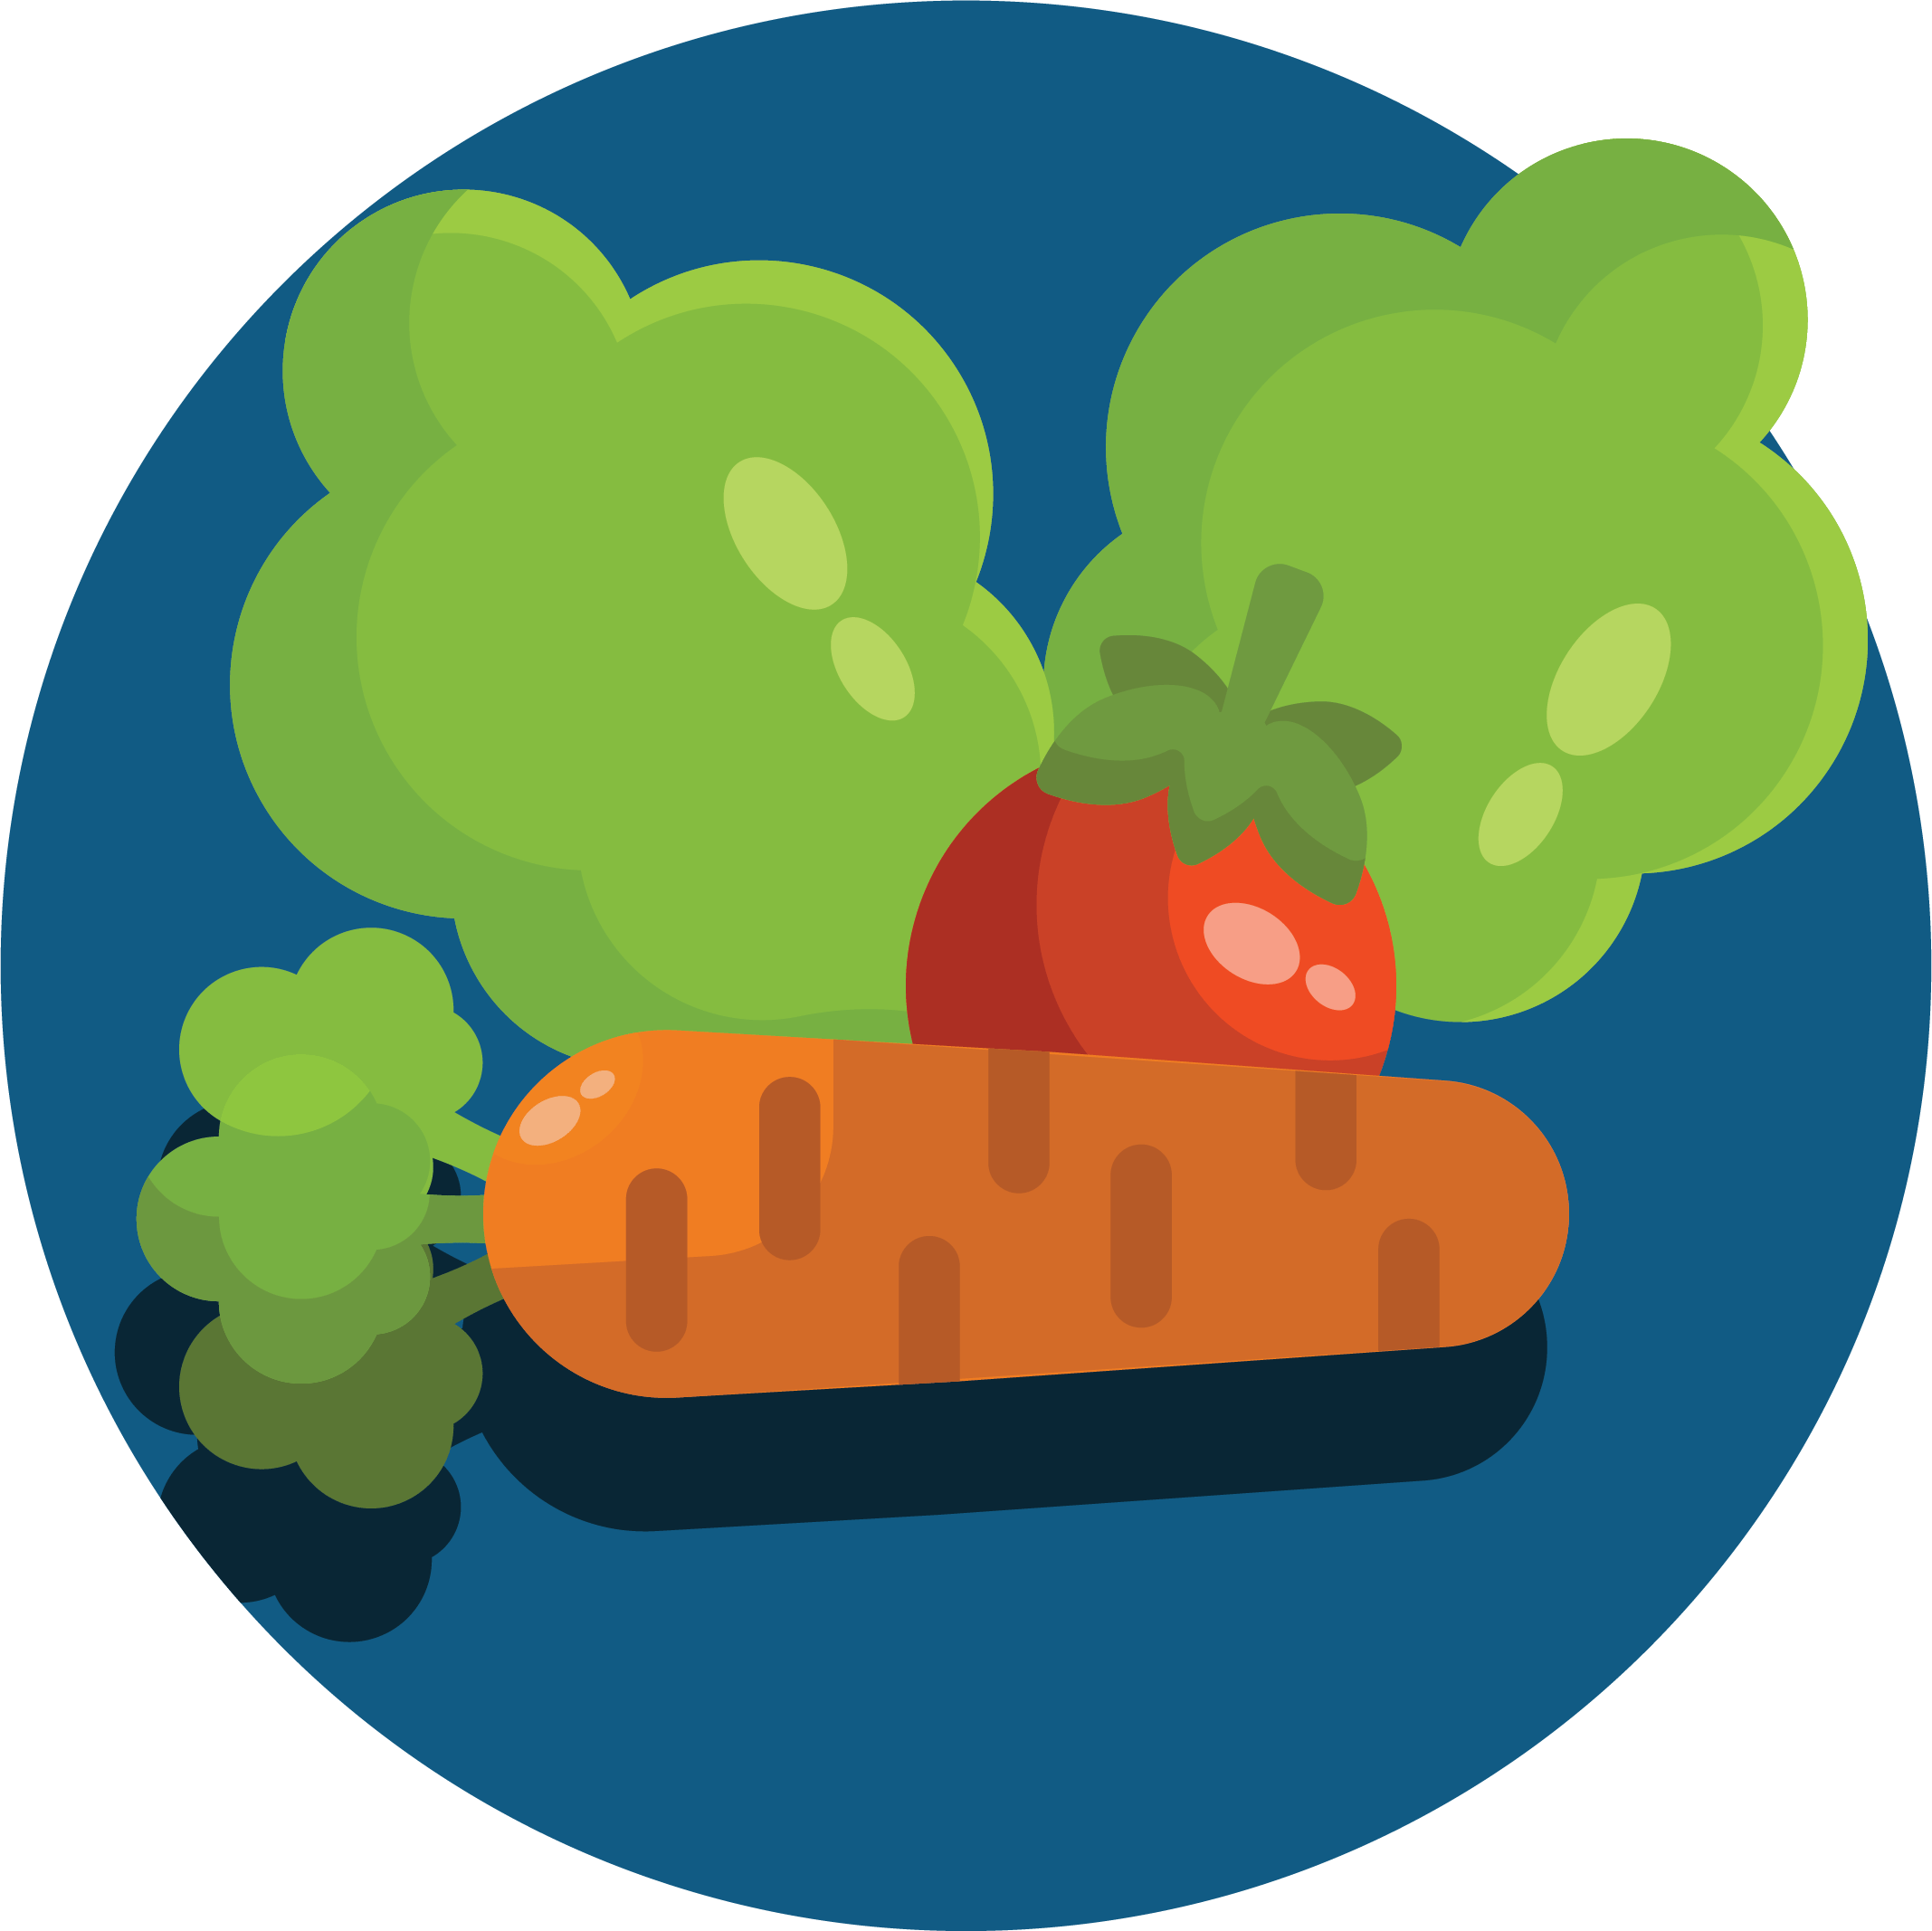 Garden produce is part of a healthy diet